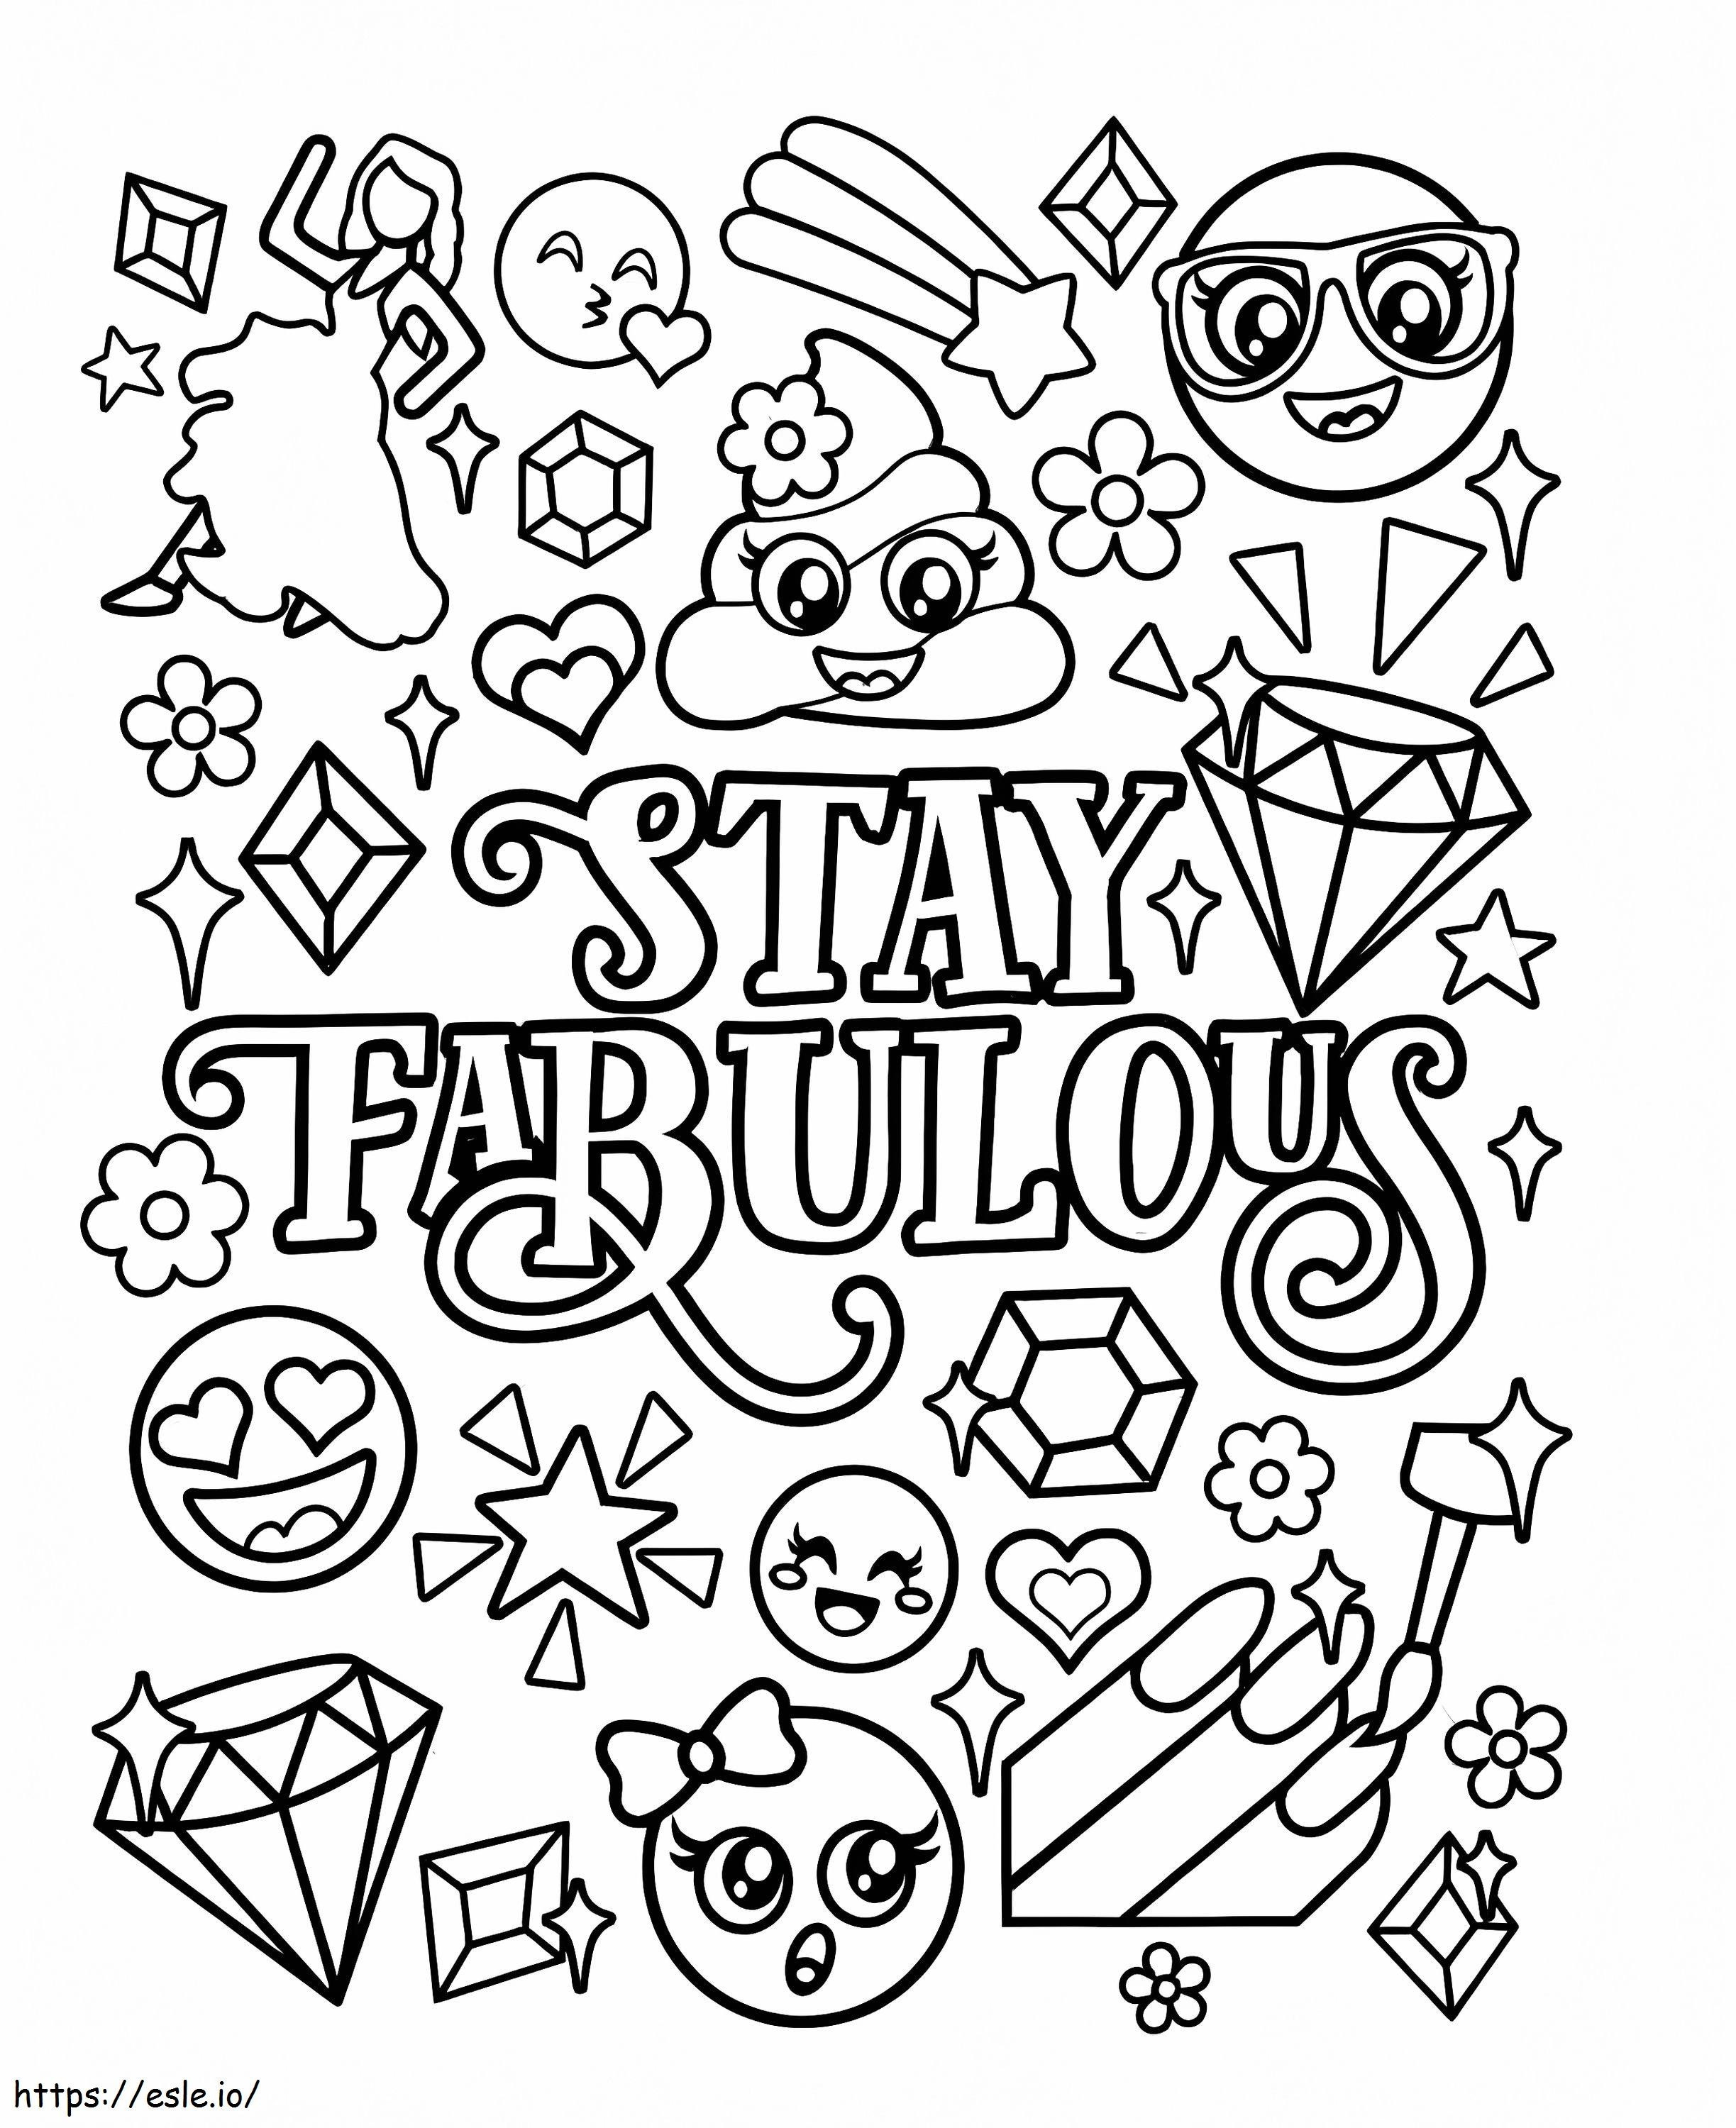 Stay Fabulous Emojis coloring page